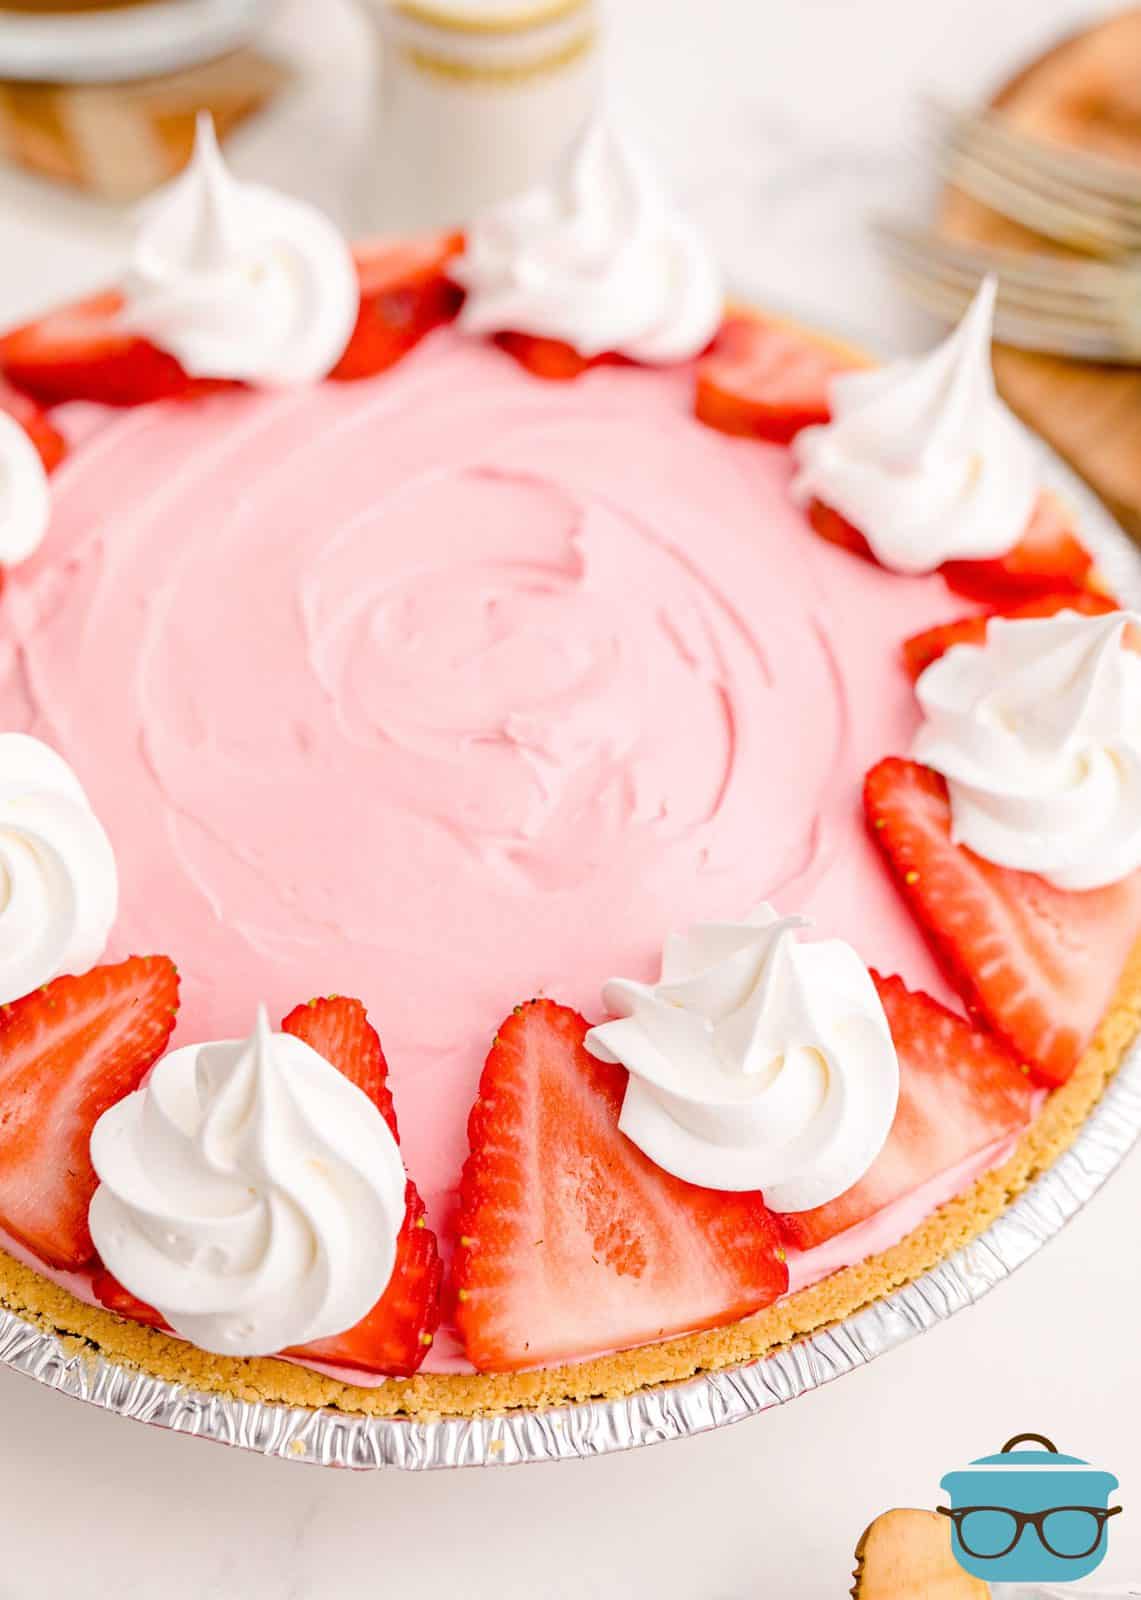 Strawberry Kool-Aid Pie garnished with sliced strawberries and cool whip.